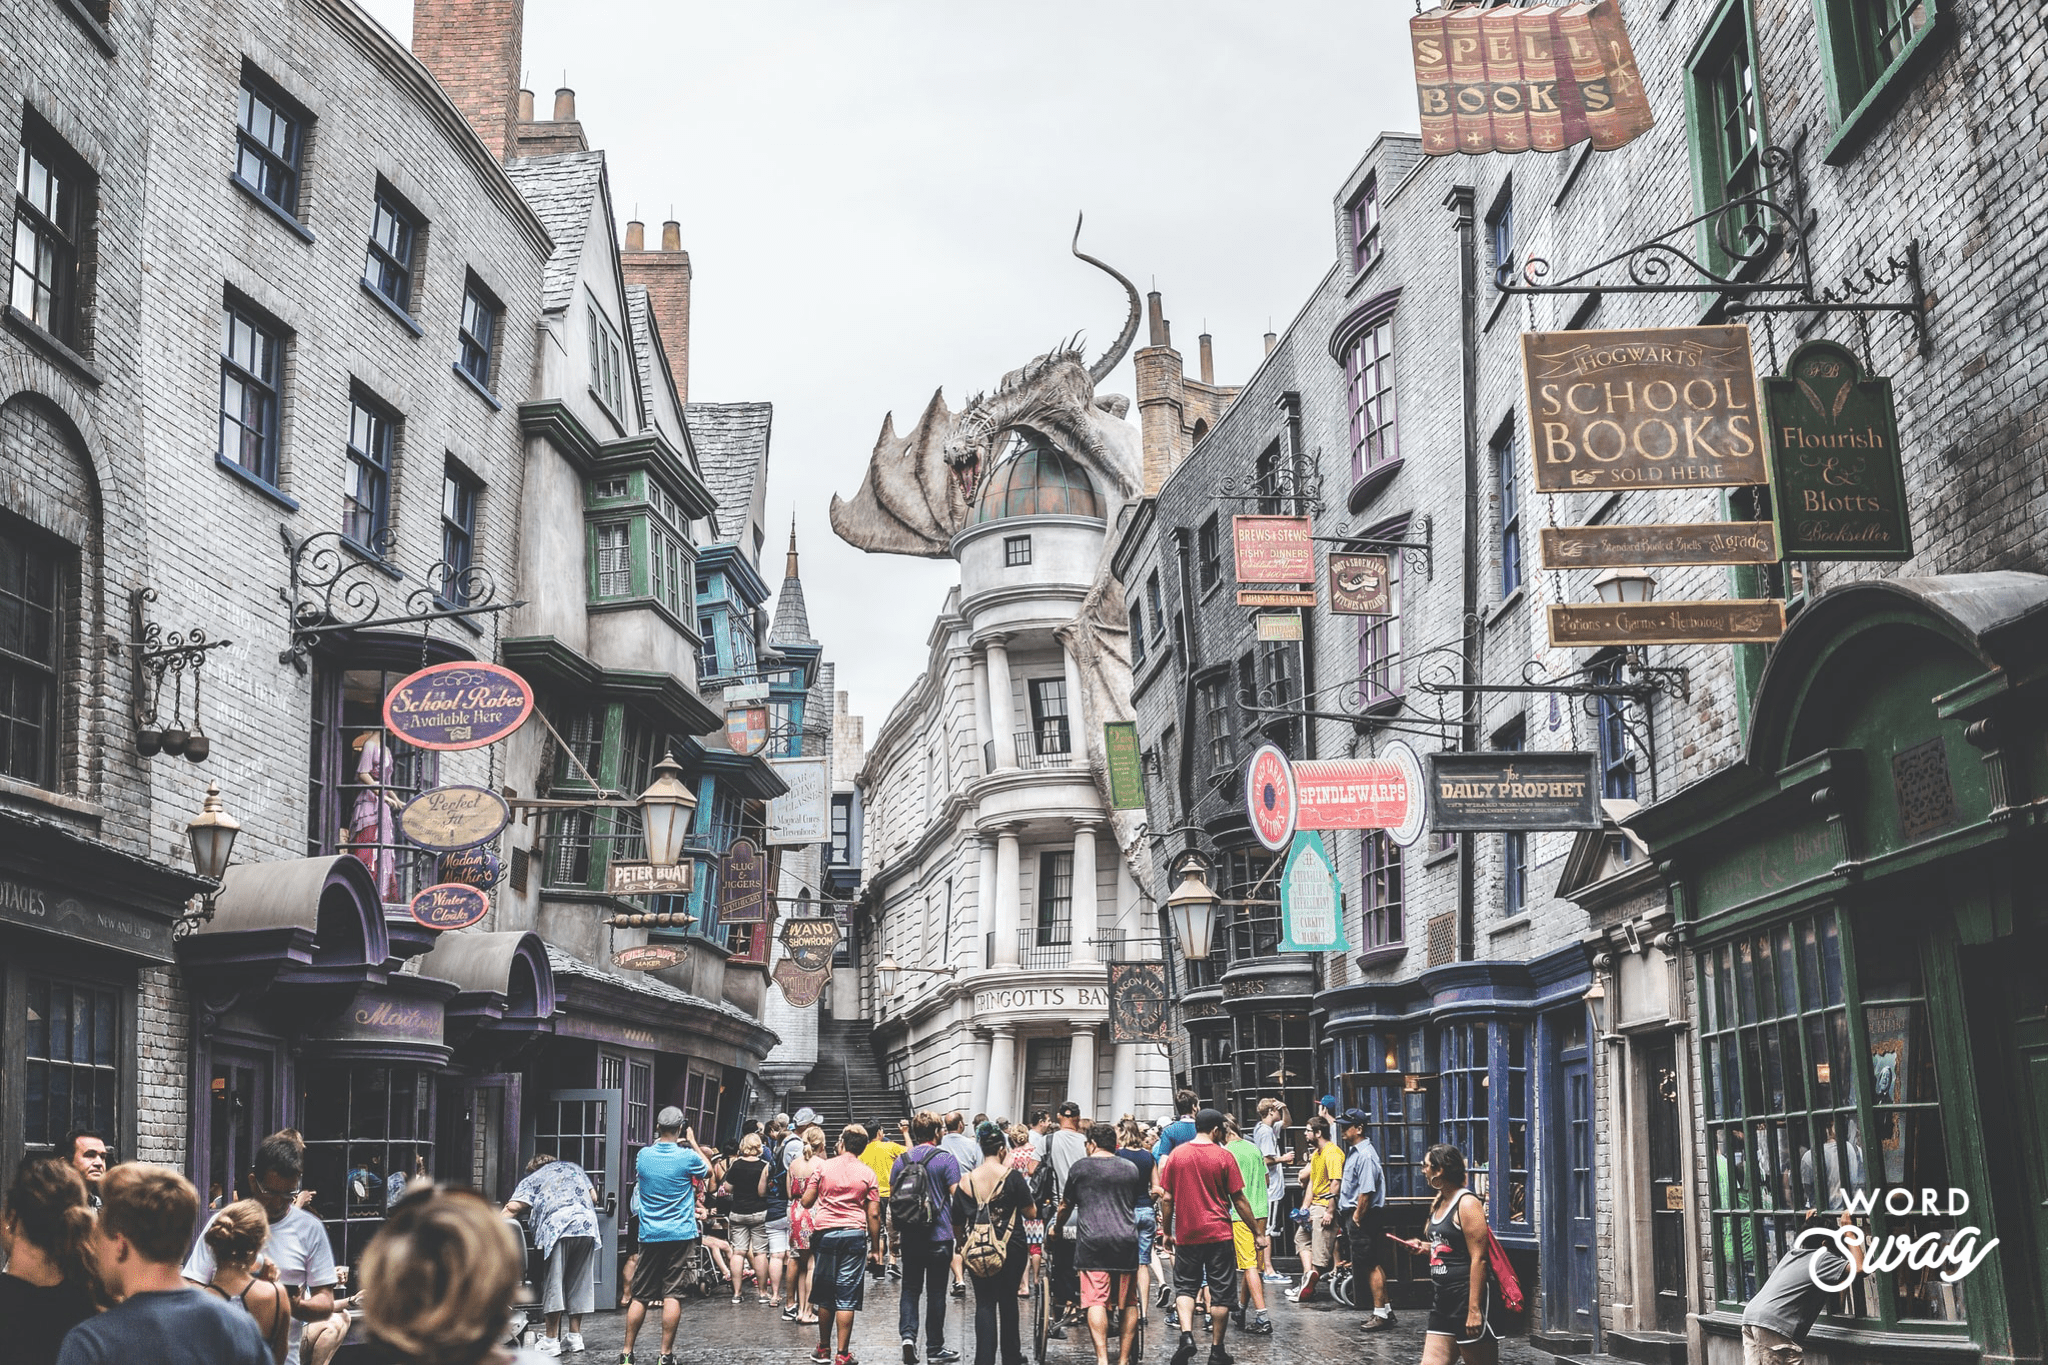 Diagon Alley Wizarding World of Harry Potter